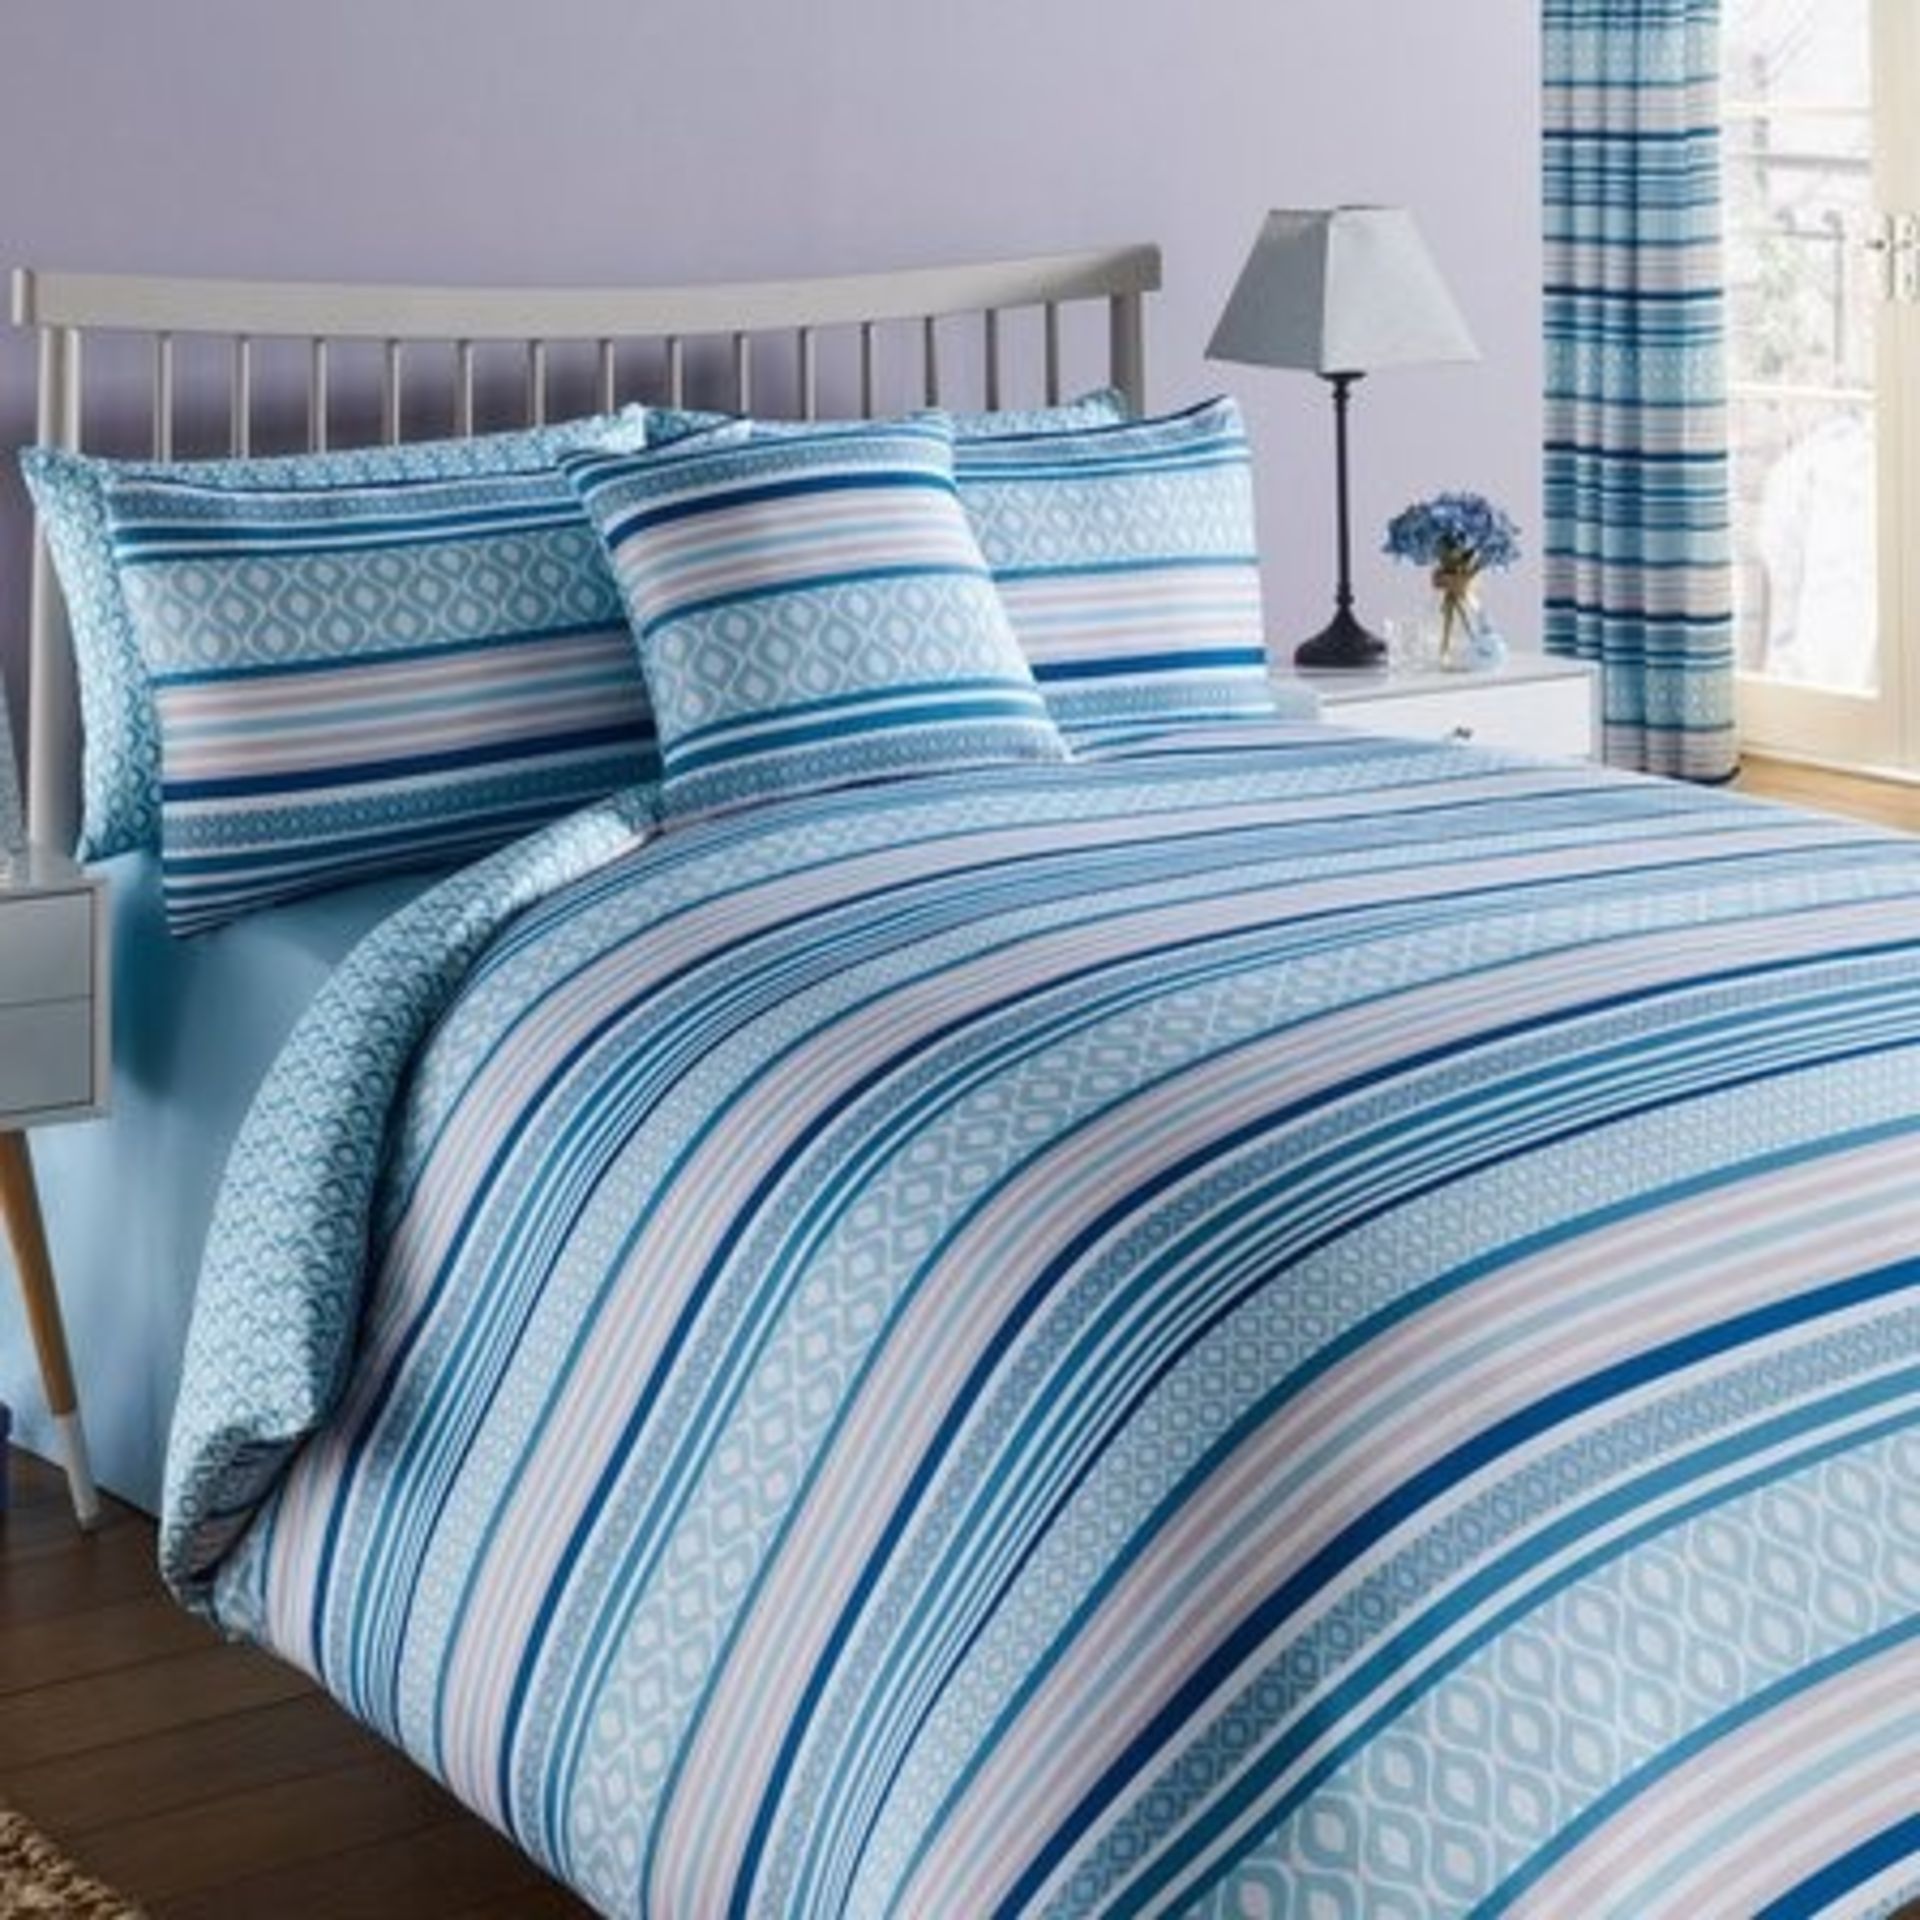 1 AS NEW BAGGED LEXINGTON BUMBER SET SINGLE DUVET COVER IN TEAL (VIEWING HIGHLY RECOMMENDED)